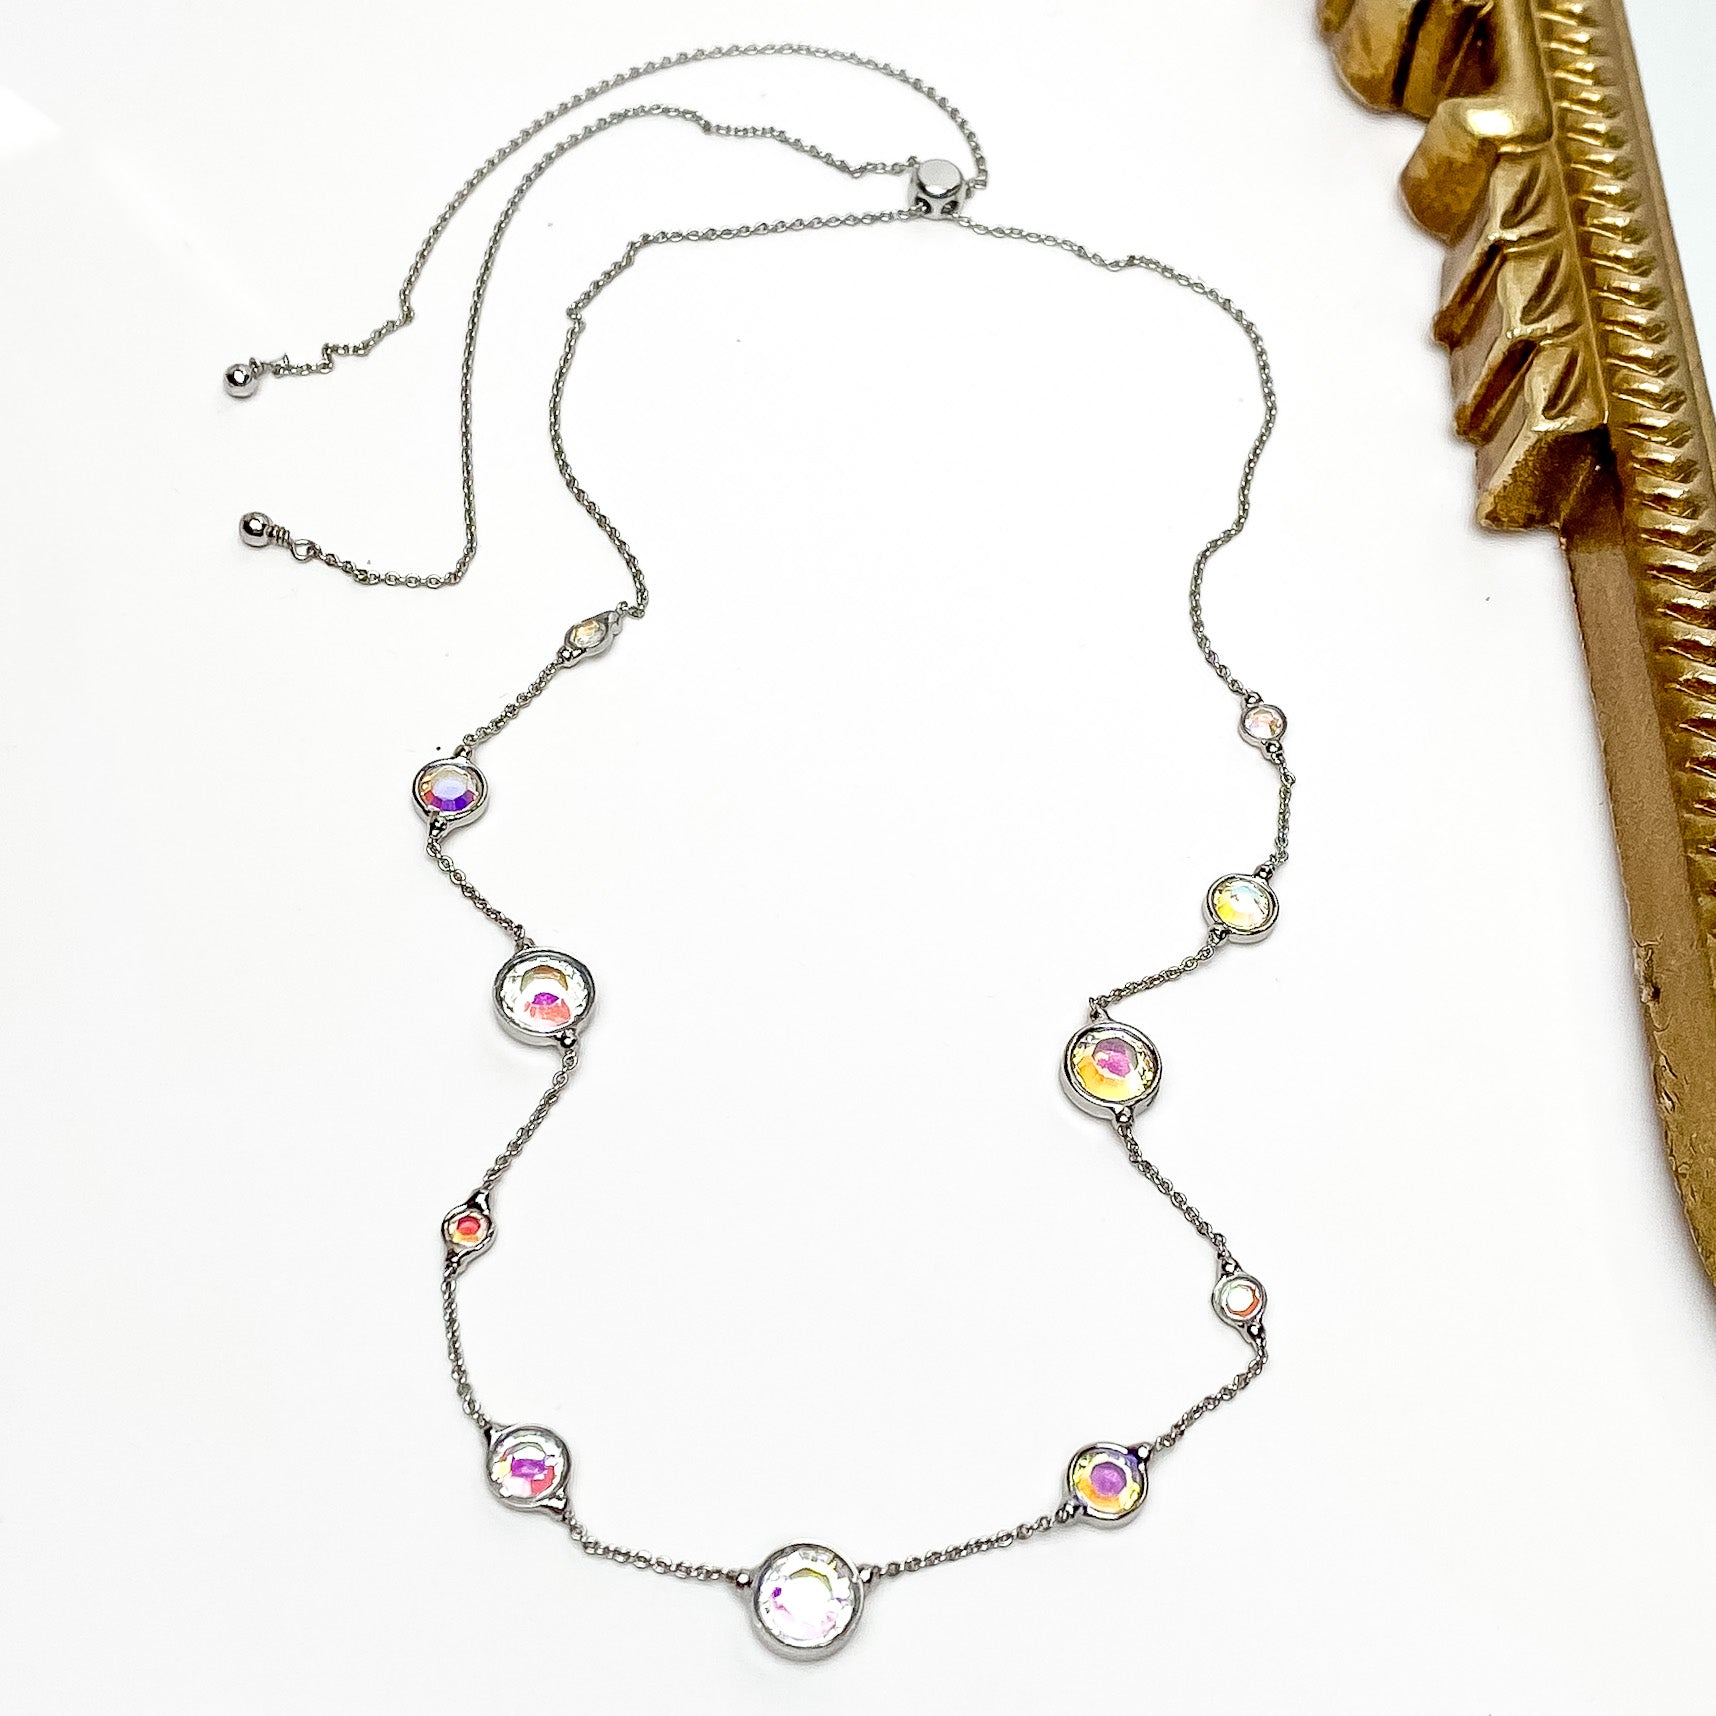 Pictured is a thin, silver chain with spaced out circle ab crystals. These crystals also come in different sizes. This necklace is pictured on a white background with a gold mirror to the right of the necklace.    